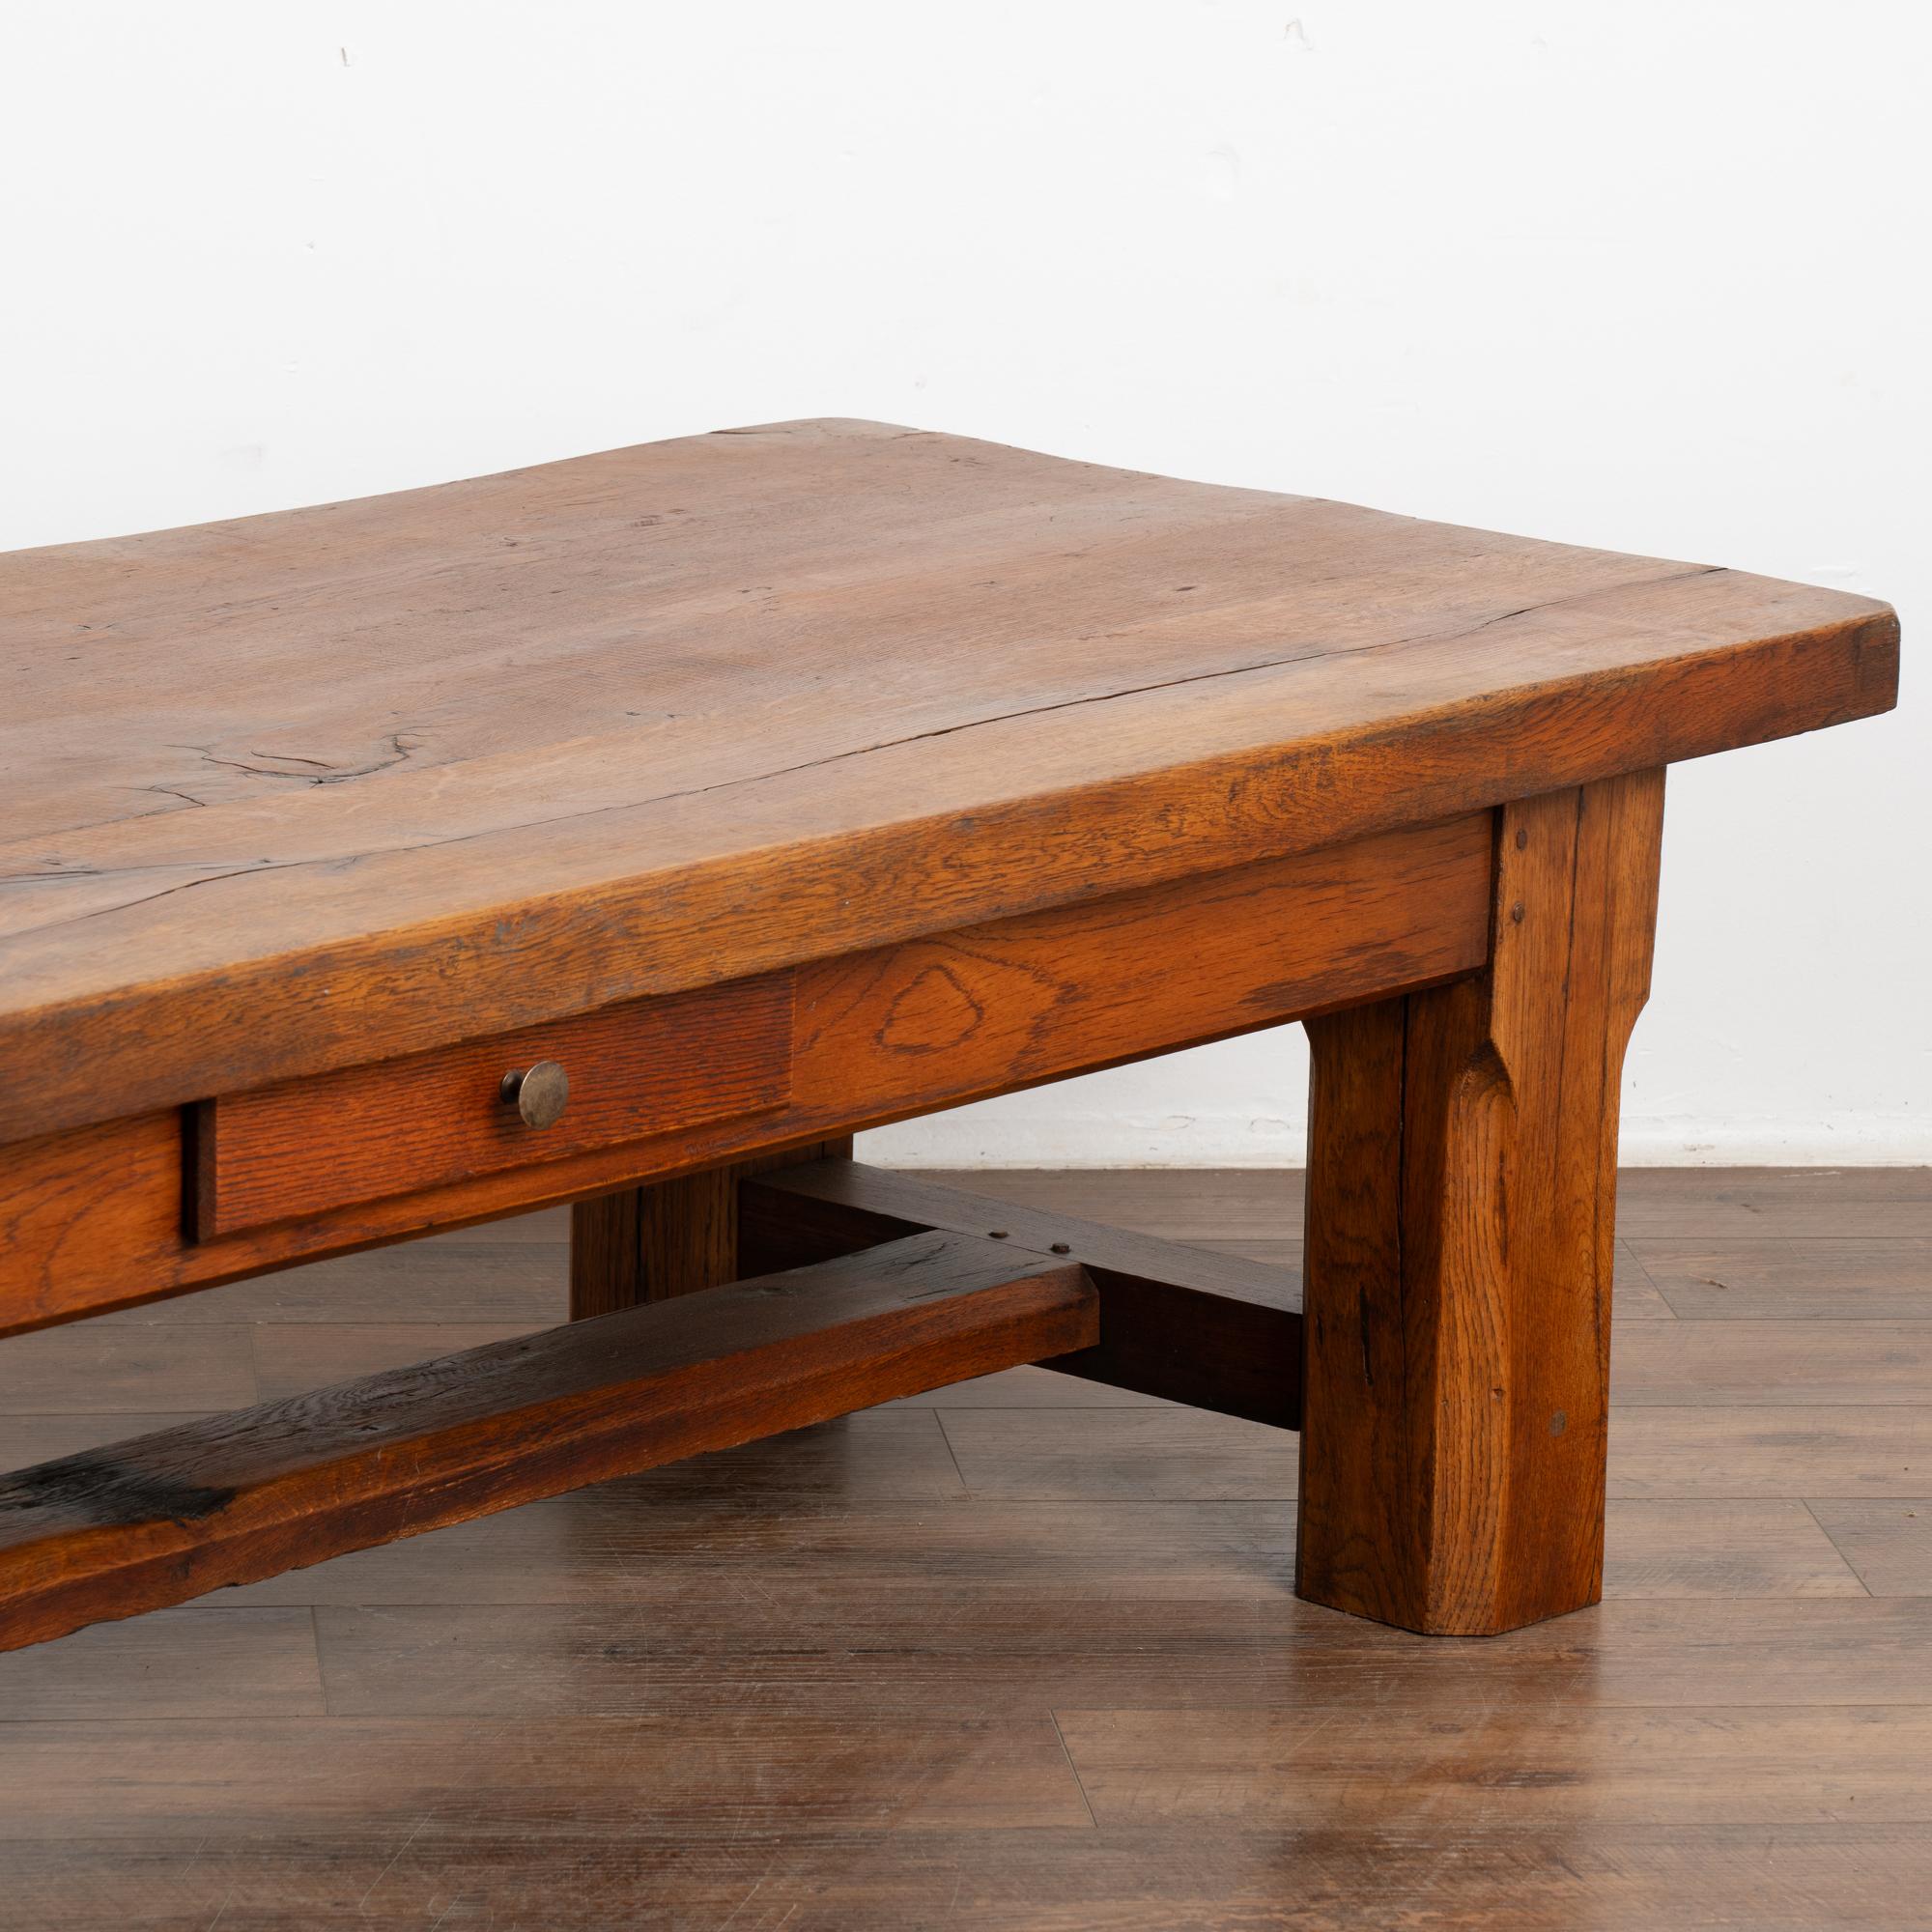 Wood Large Coffee Table With Single Drawer from France, circa 1900 For Sale